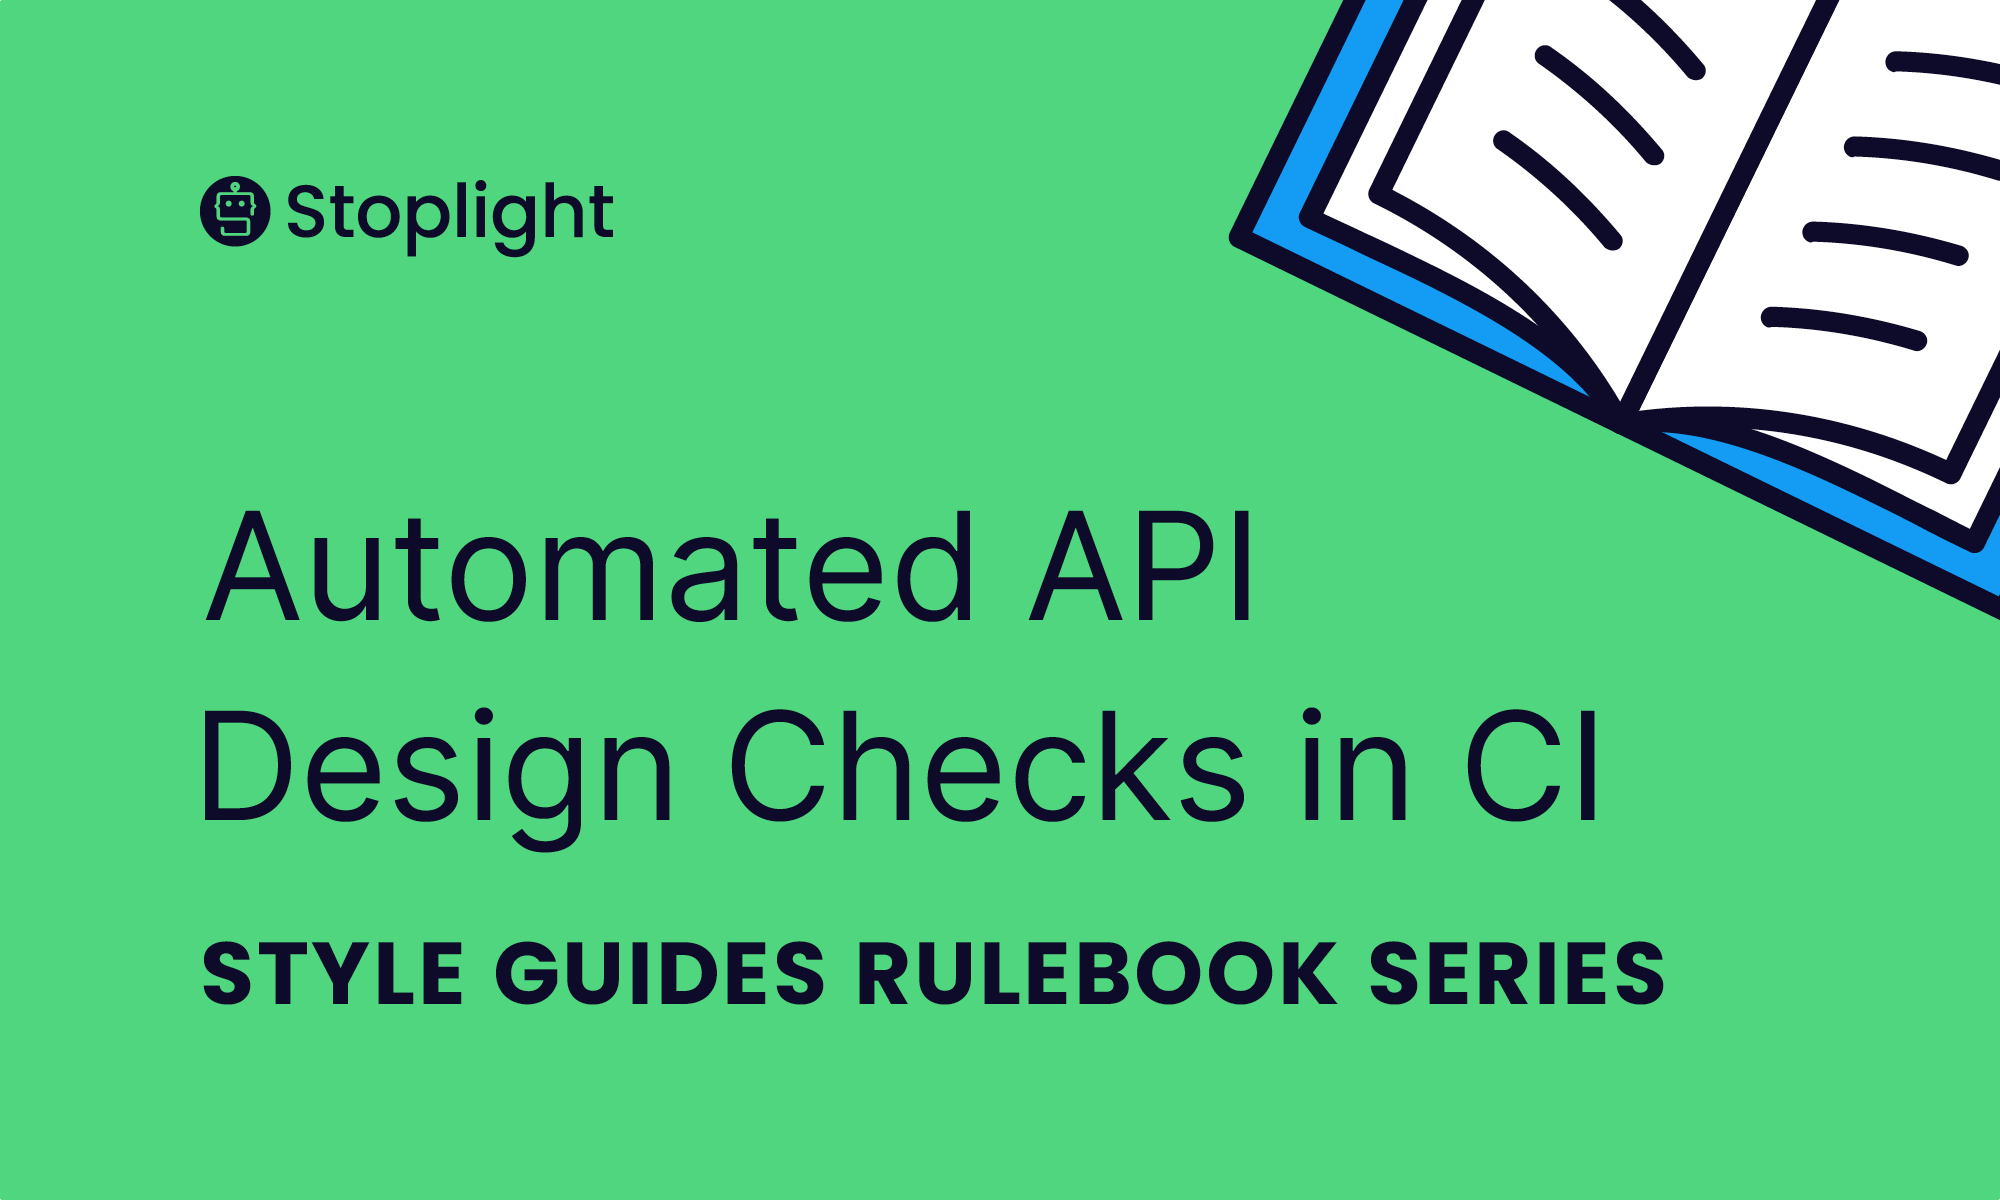 Style Guides Rulebook Series: Automated API Design checks in CI